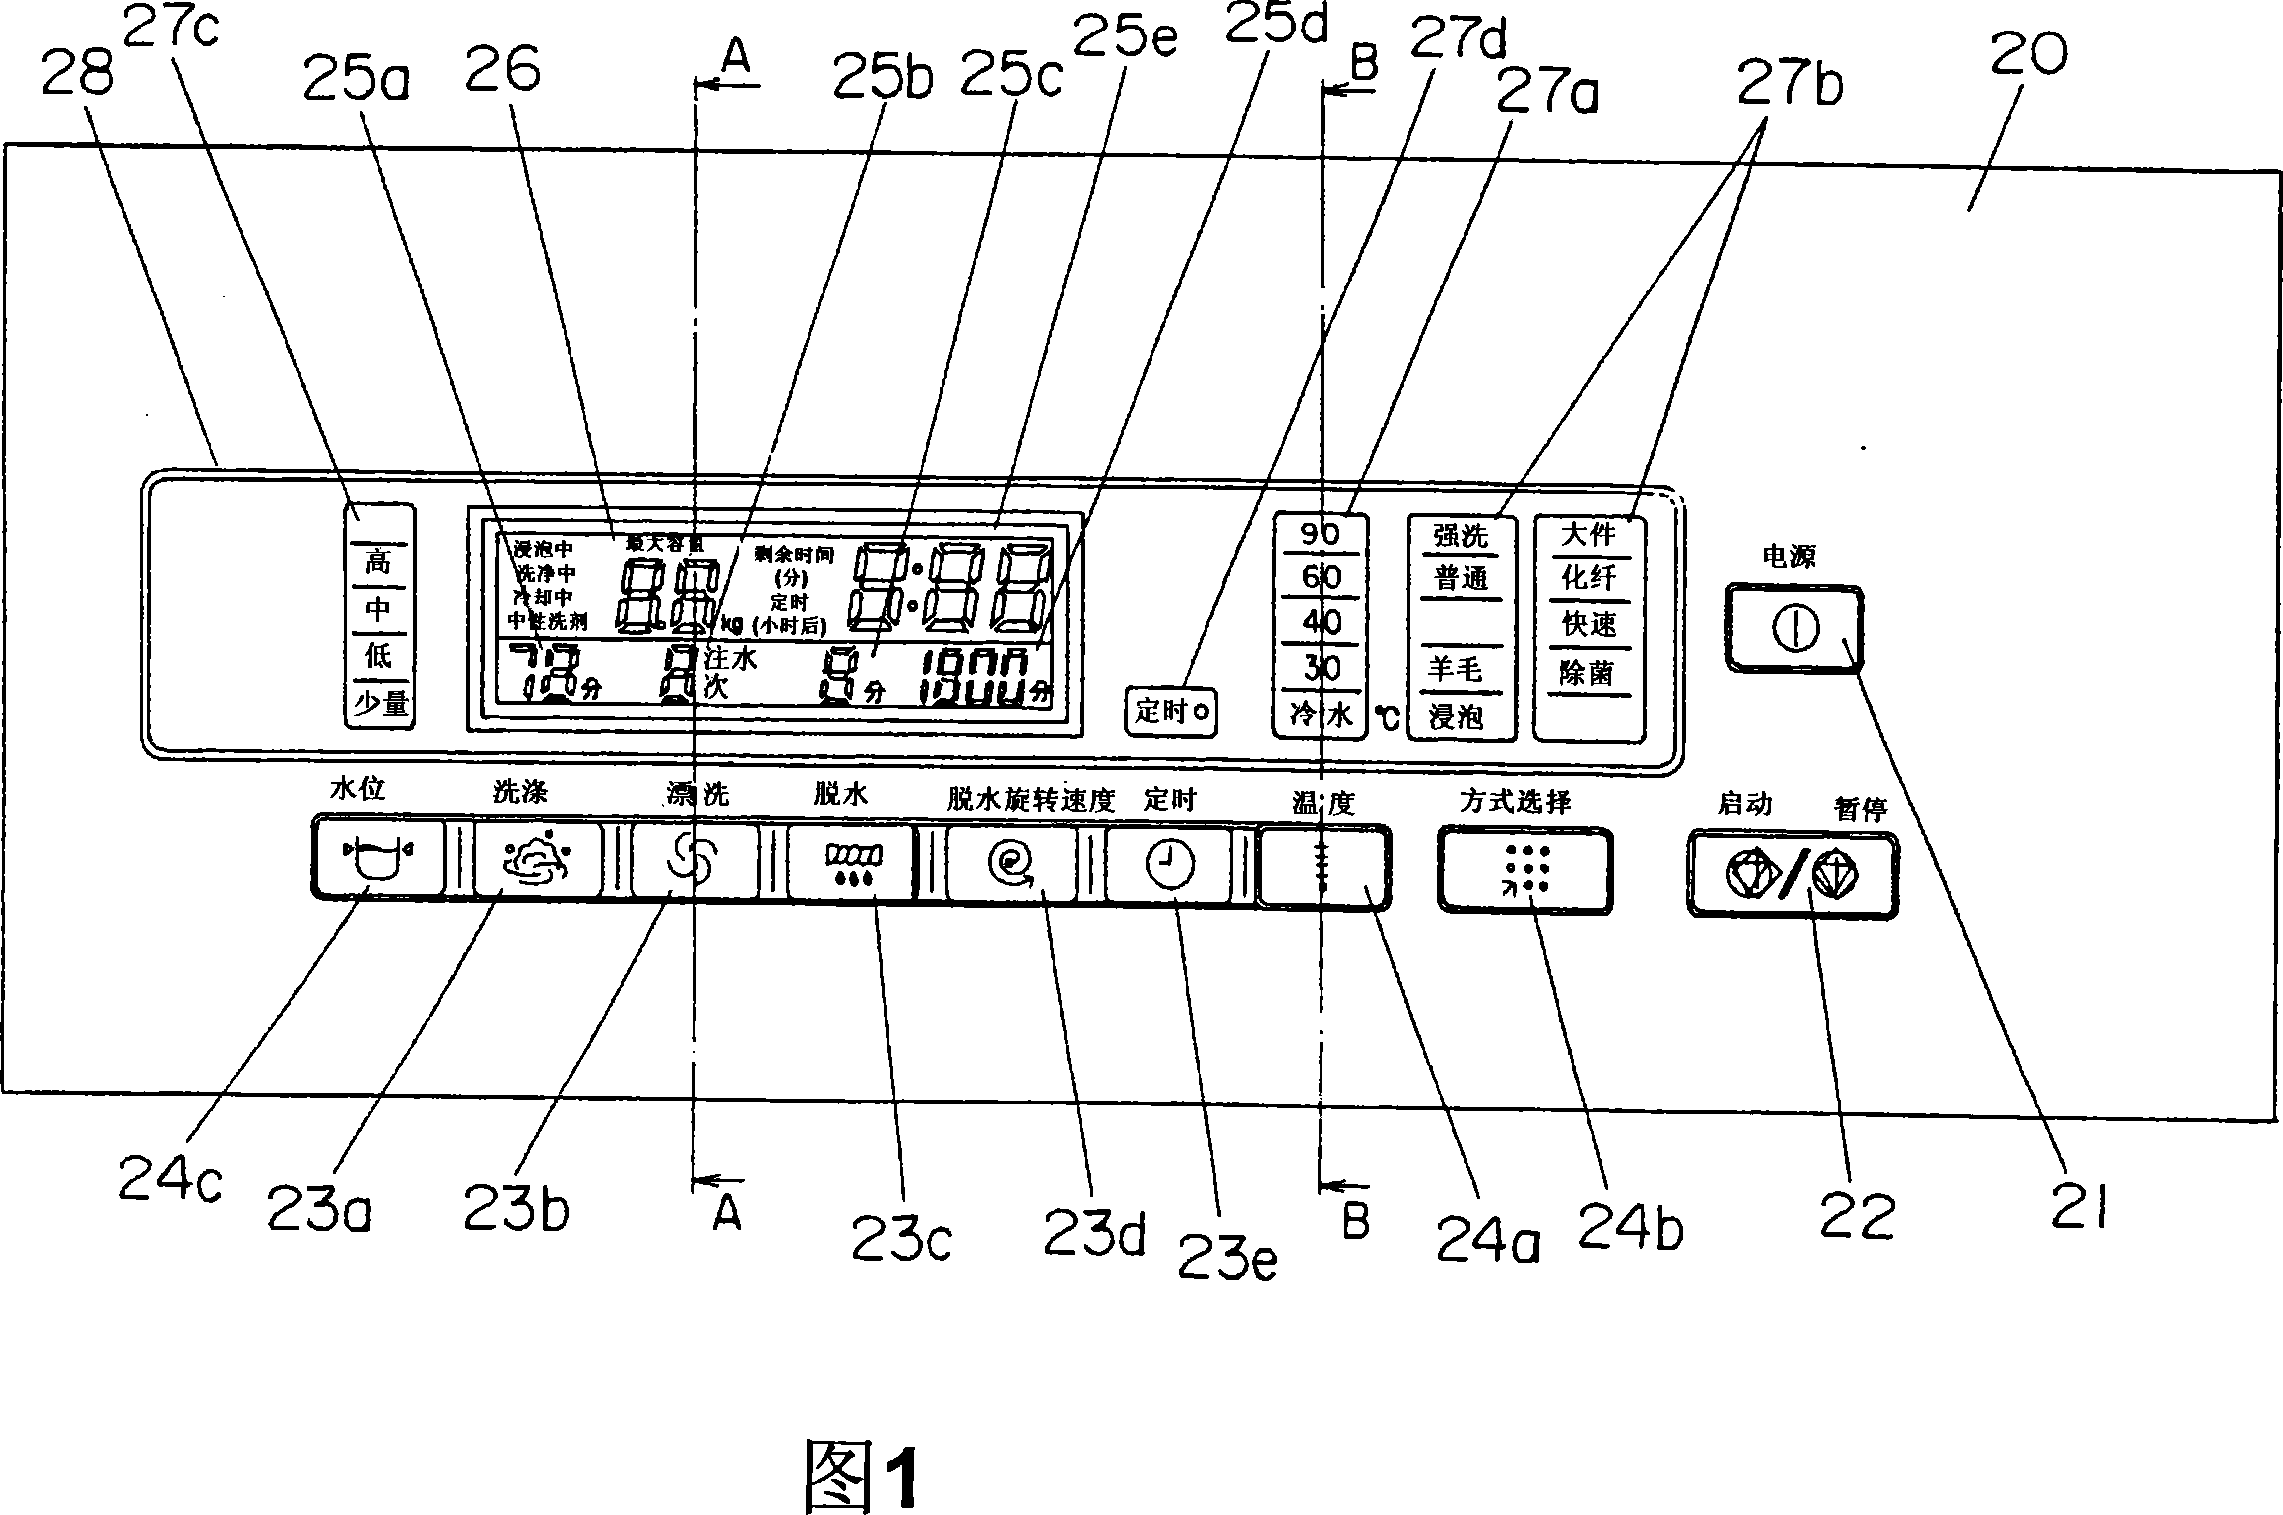 Operation display device